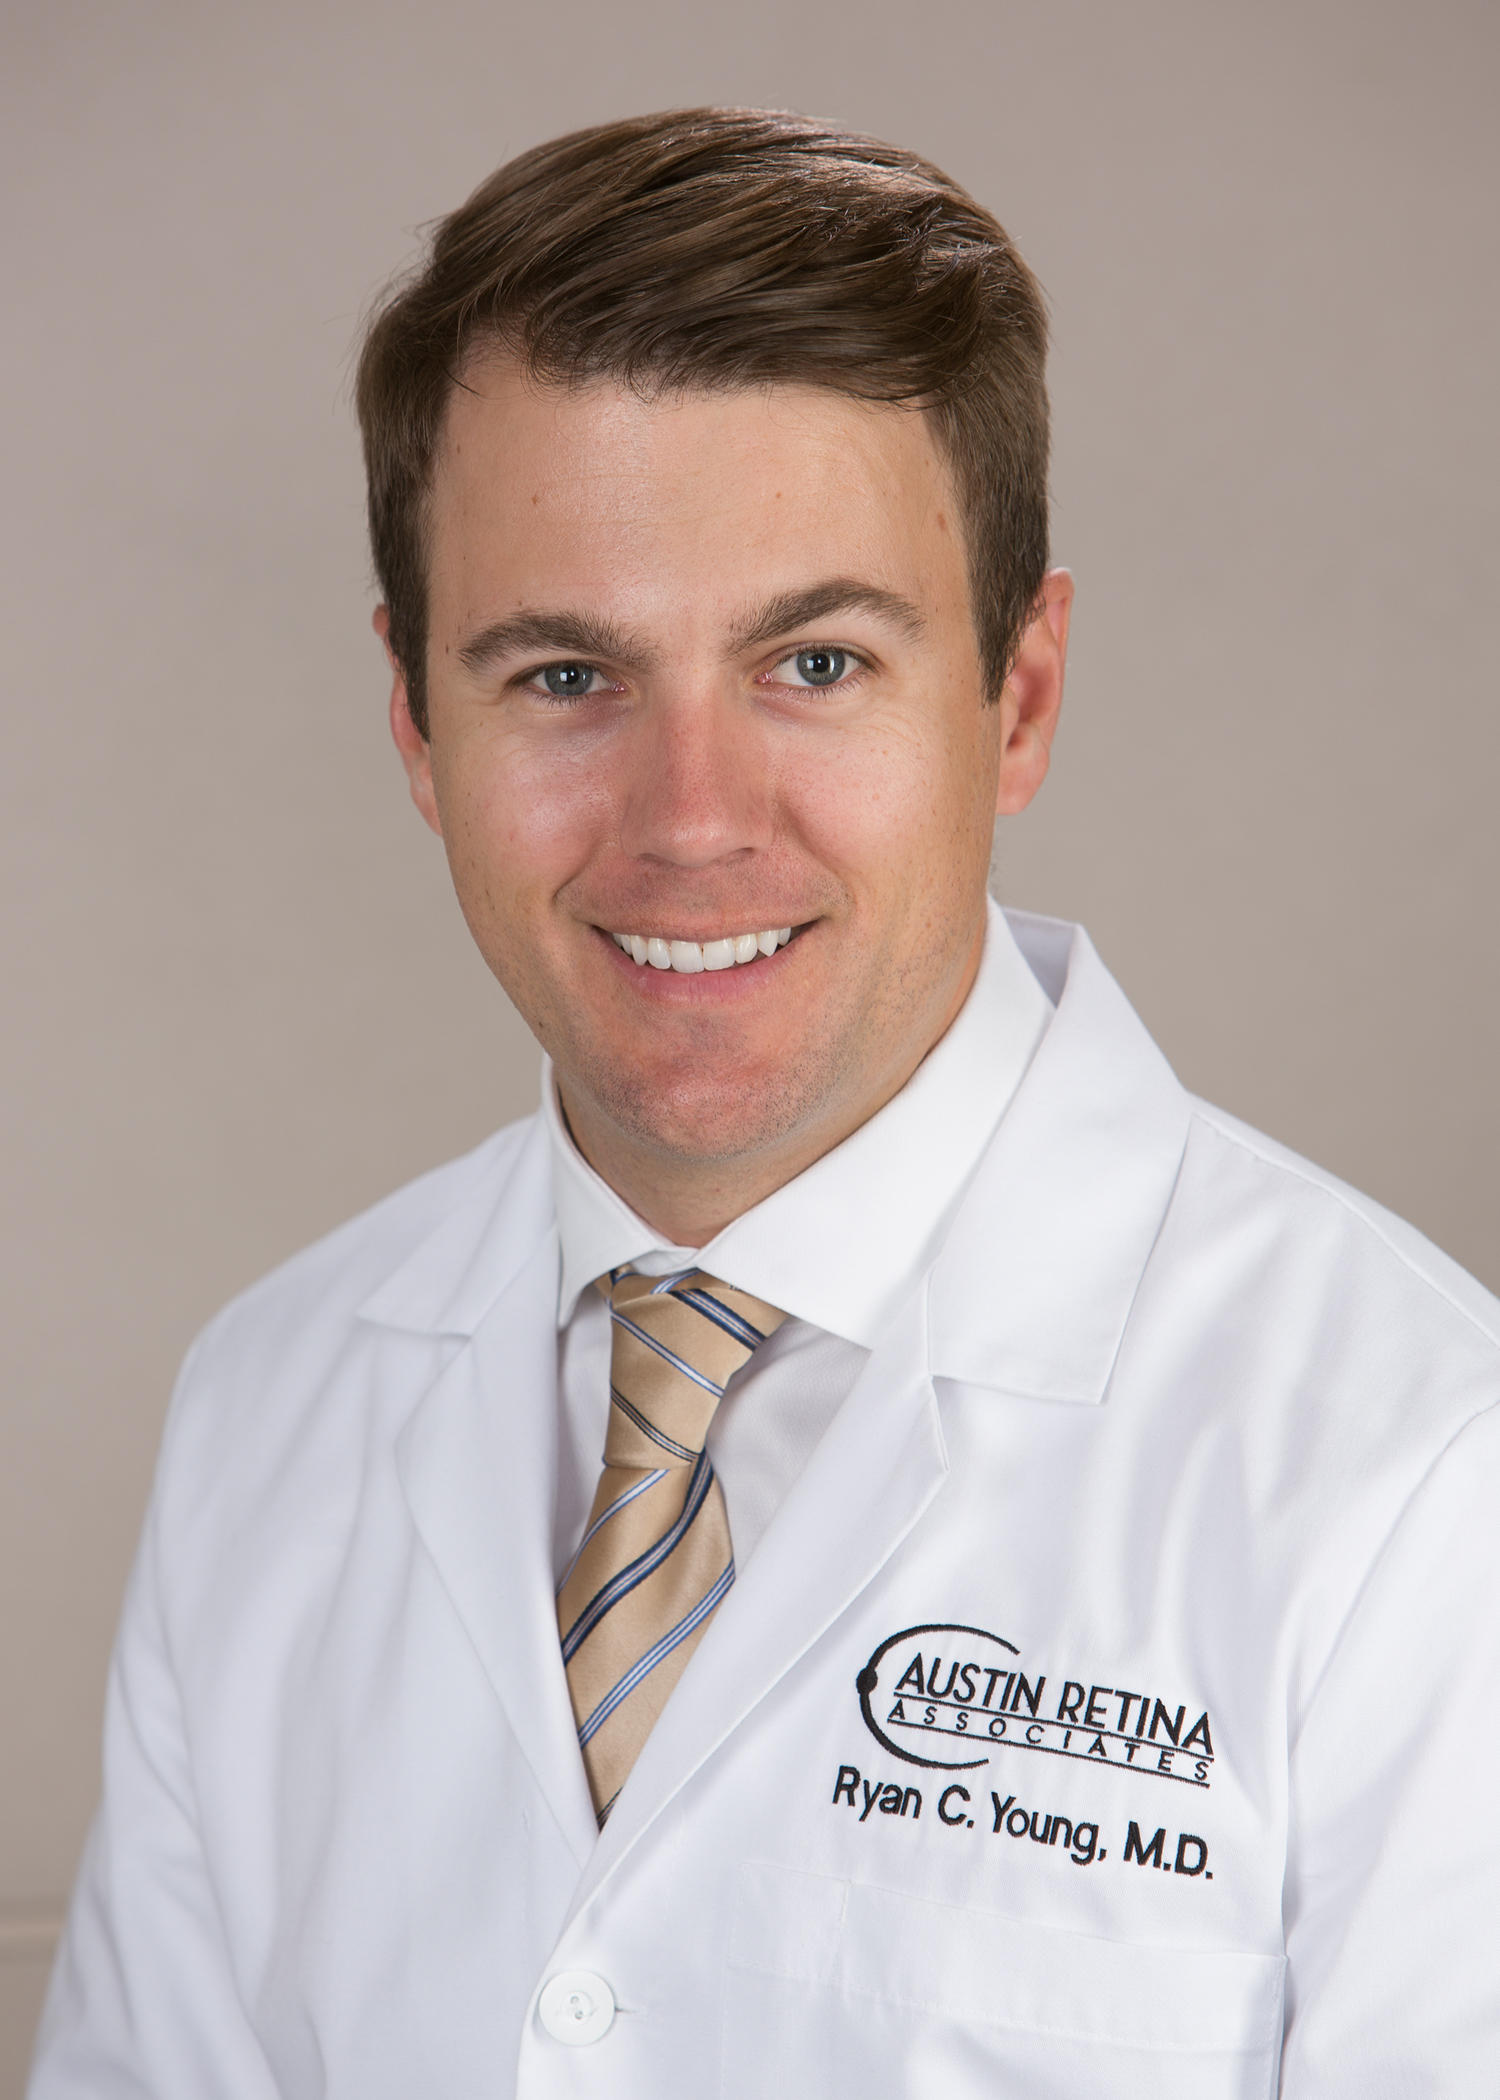 Ryan Carter Young, MD Photo